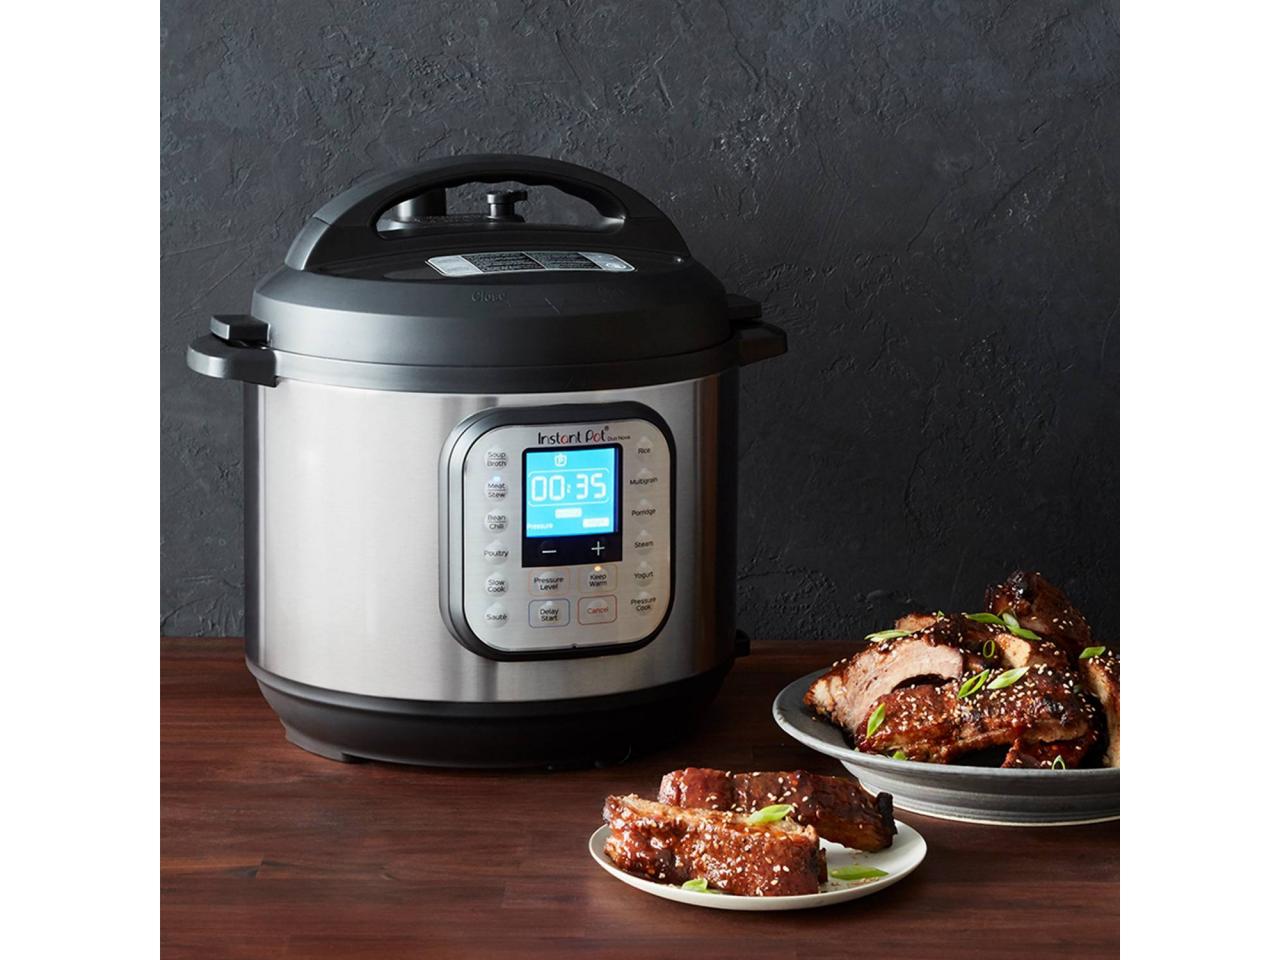 https://food.fnr.sndimg.com/content/dam/images/food/products/2020/1/6/rx_instant-pot-duo-nova-6-quart-7-in-1-one-touch-multi-use-programmable-pressure-cooker-with-new-easy-seal-lid.jpeg.rend.hgtvcom.1280.960.suffix/1578340410900.jpeg